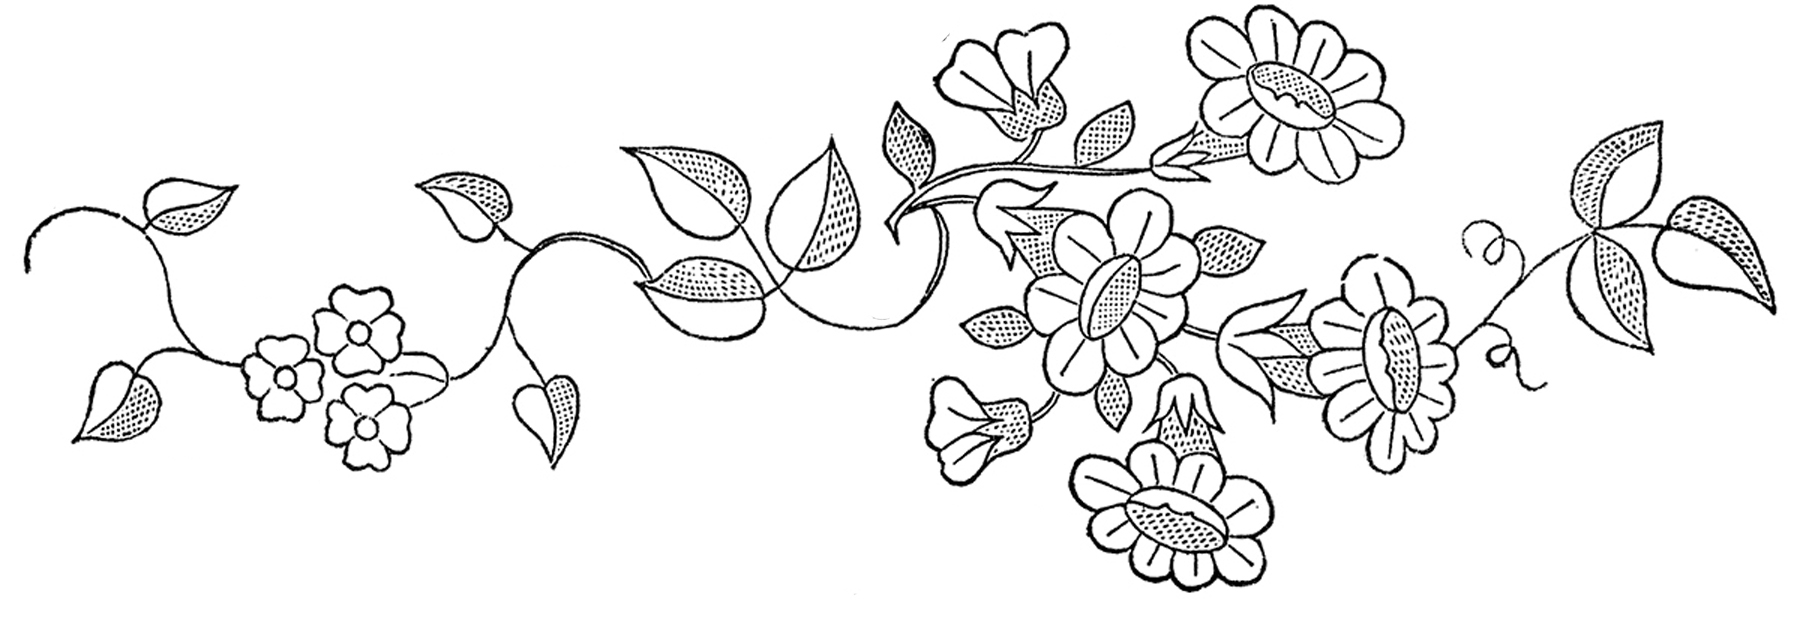 New Hand Embroidery Patterns Hand Embroidery Patterns Digitemb